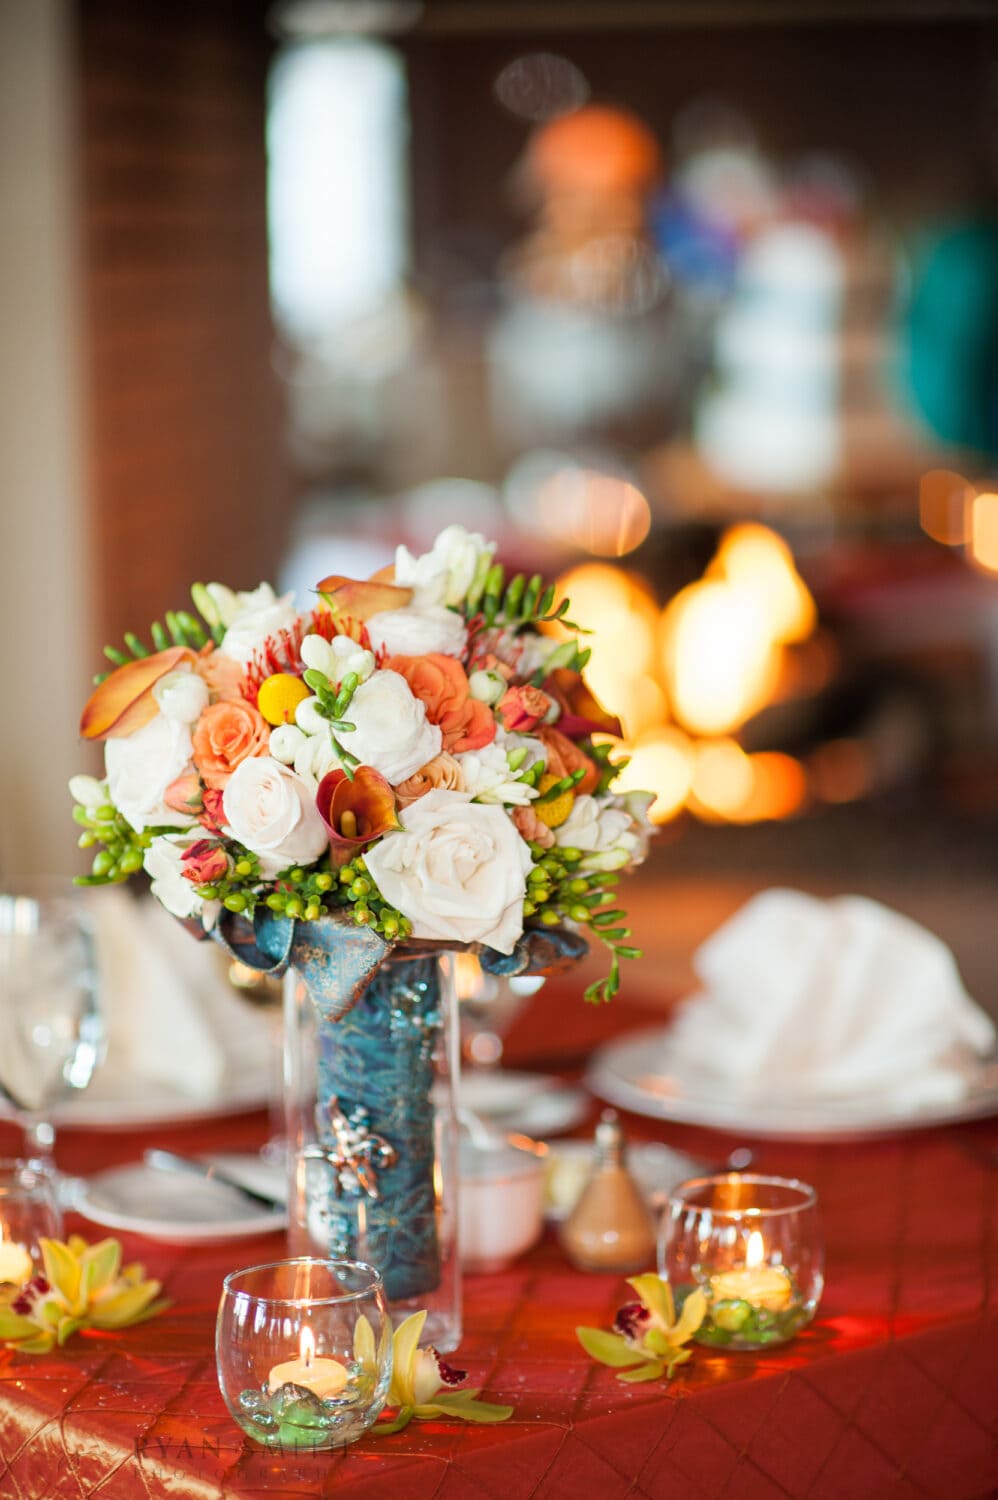 Bride's flowers with a fire in the background - Ocean Club